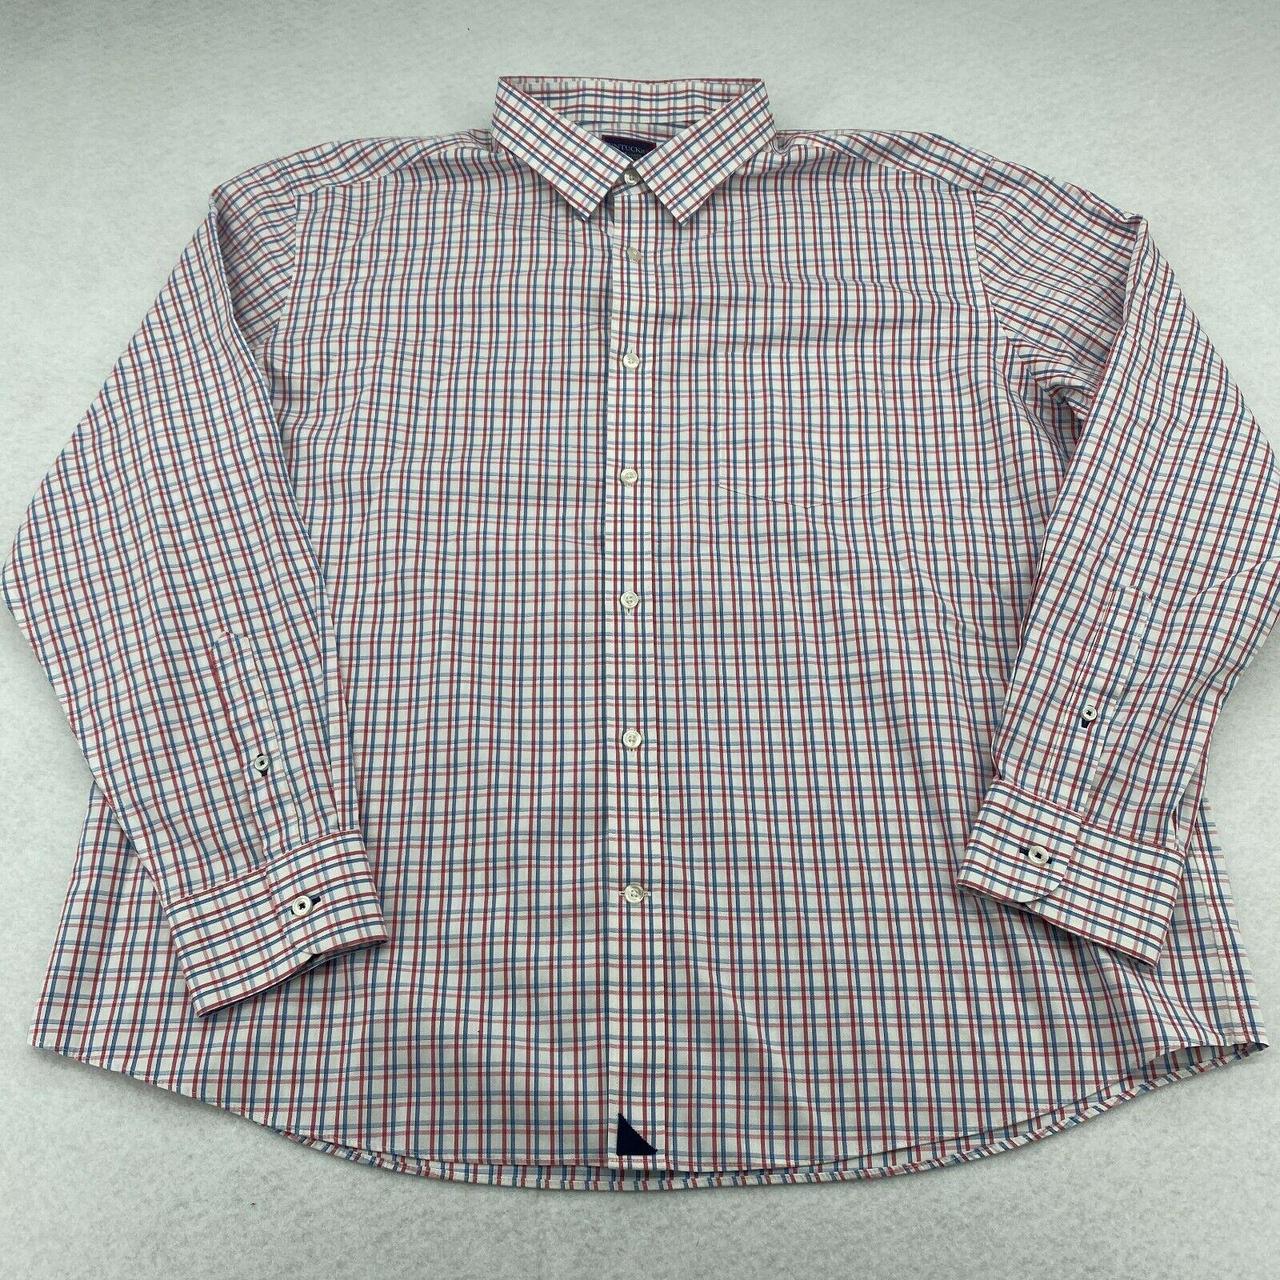 Product Image 1 - UNTUCKIT Red Blue Plaid Long